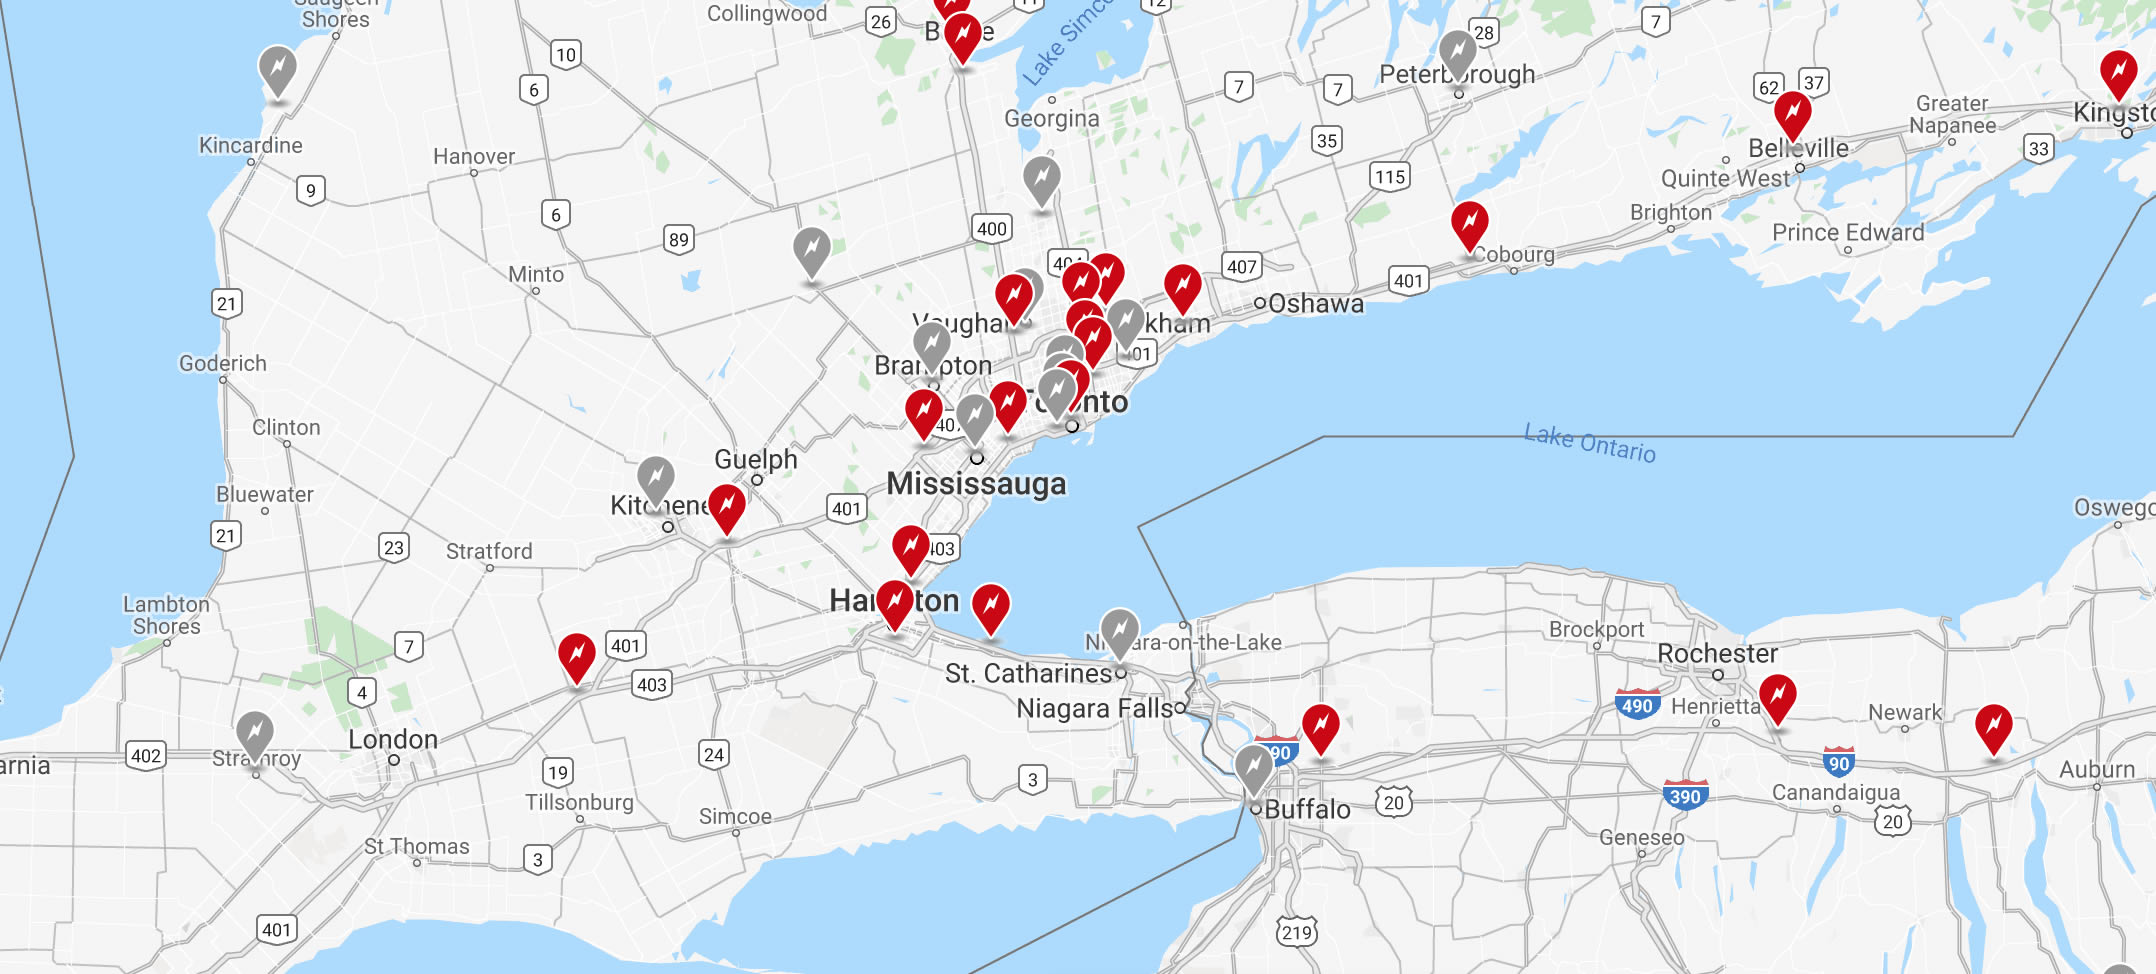 Tesla Charging Stations in Canada - Toronto